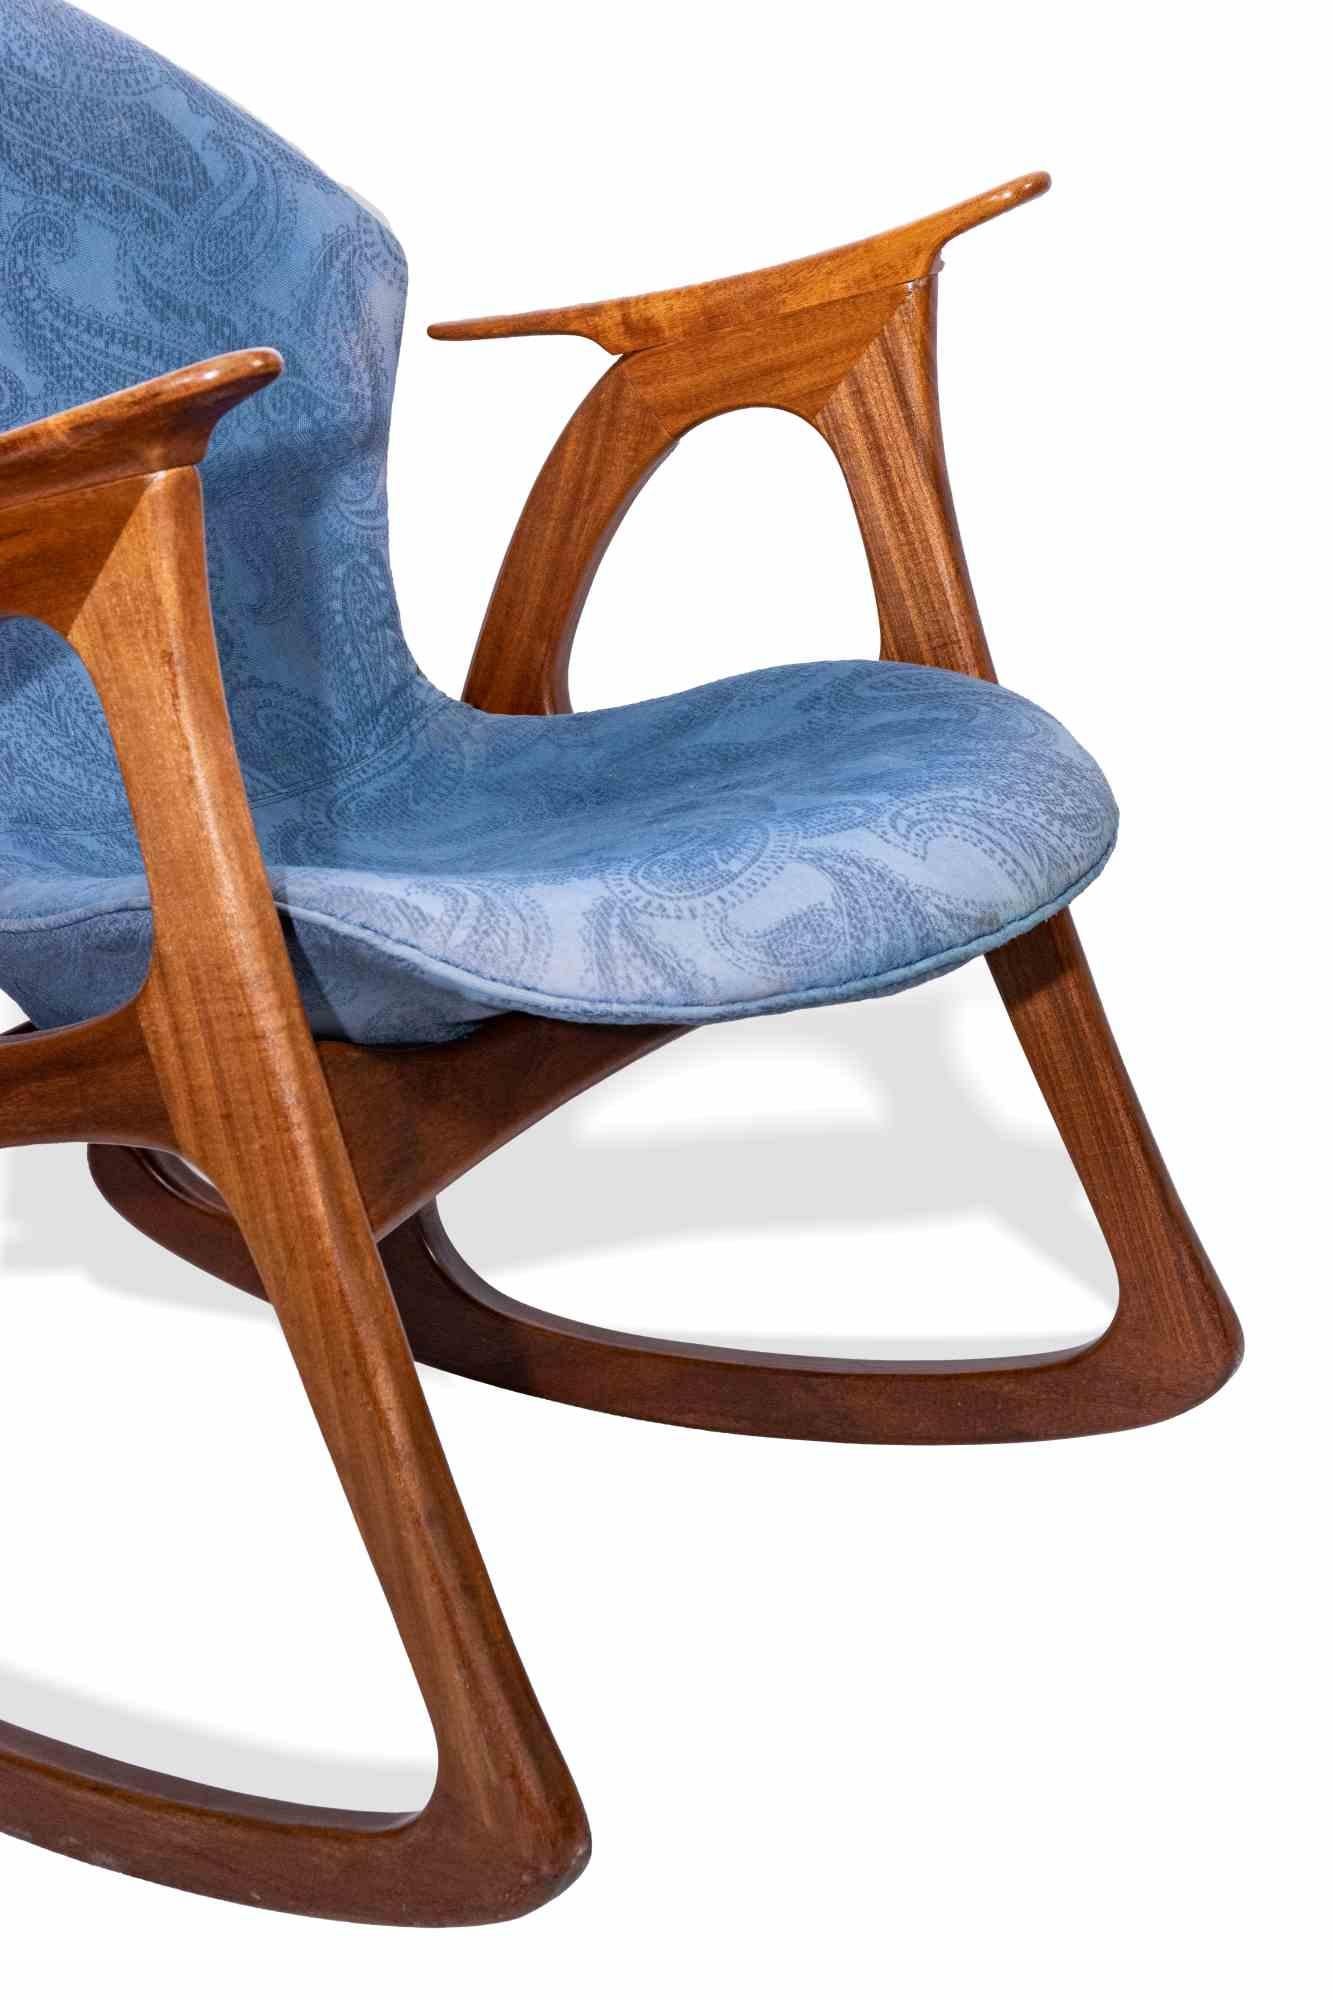 Danish rocking chair is an original design item designed by Aage Christiansen and manufactured by Erhardsen & Andersen in Denmark in the 1970s.

This chair is made of teak wood and covered by light blue fabric.

This elegant rocking chair is an